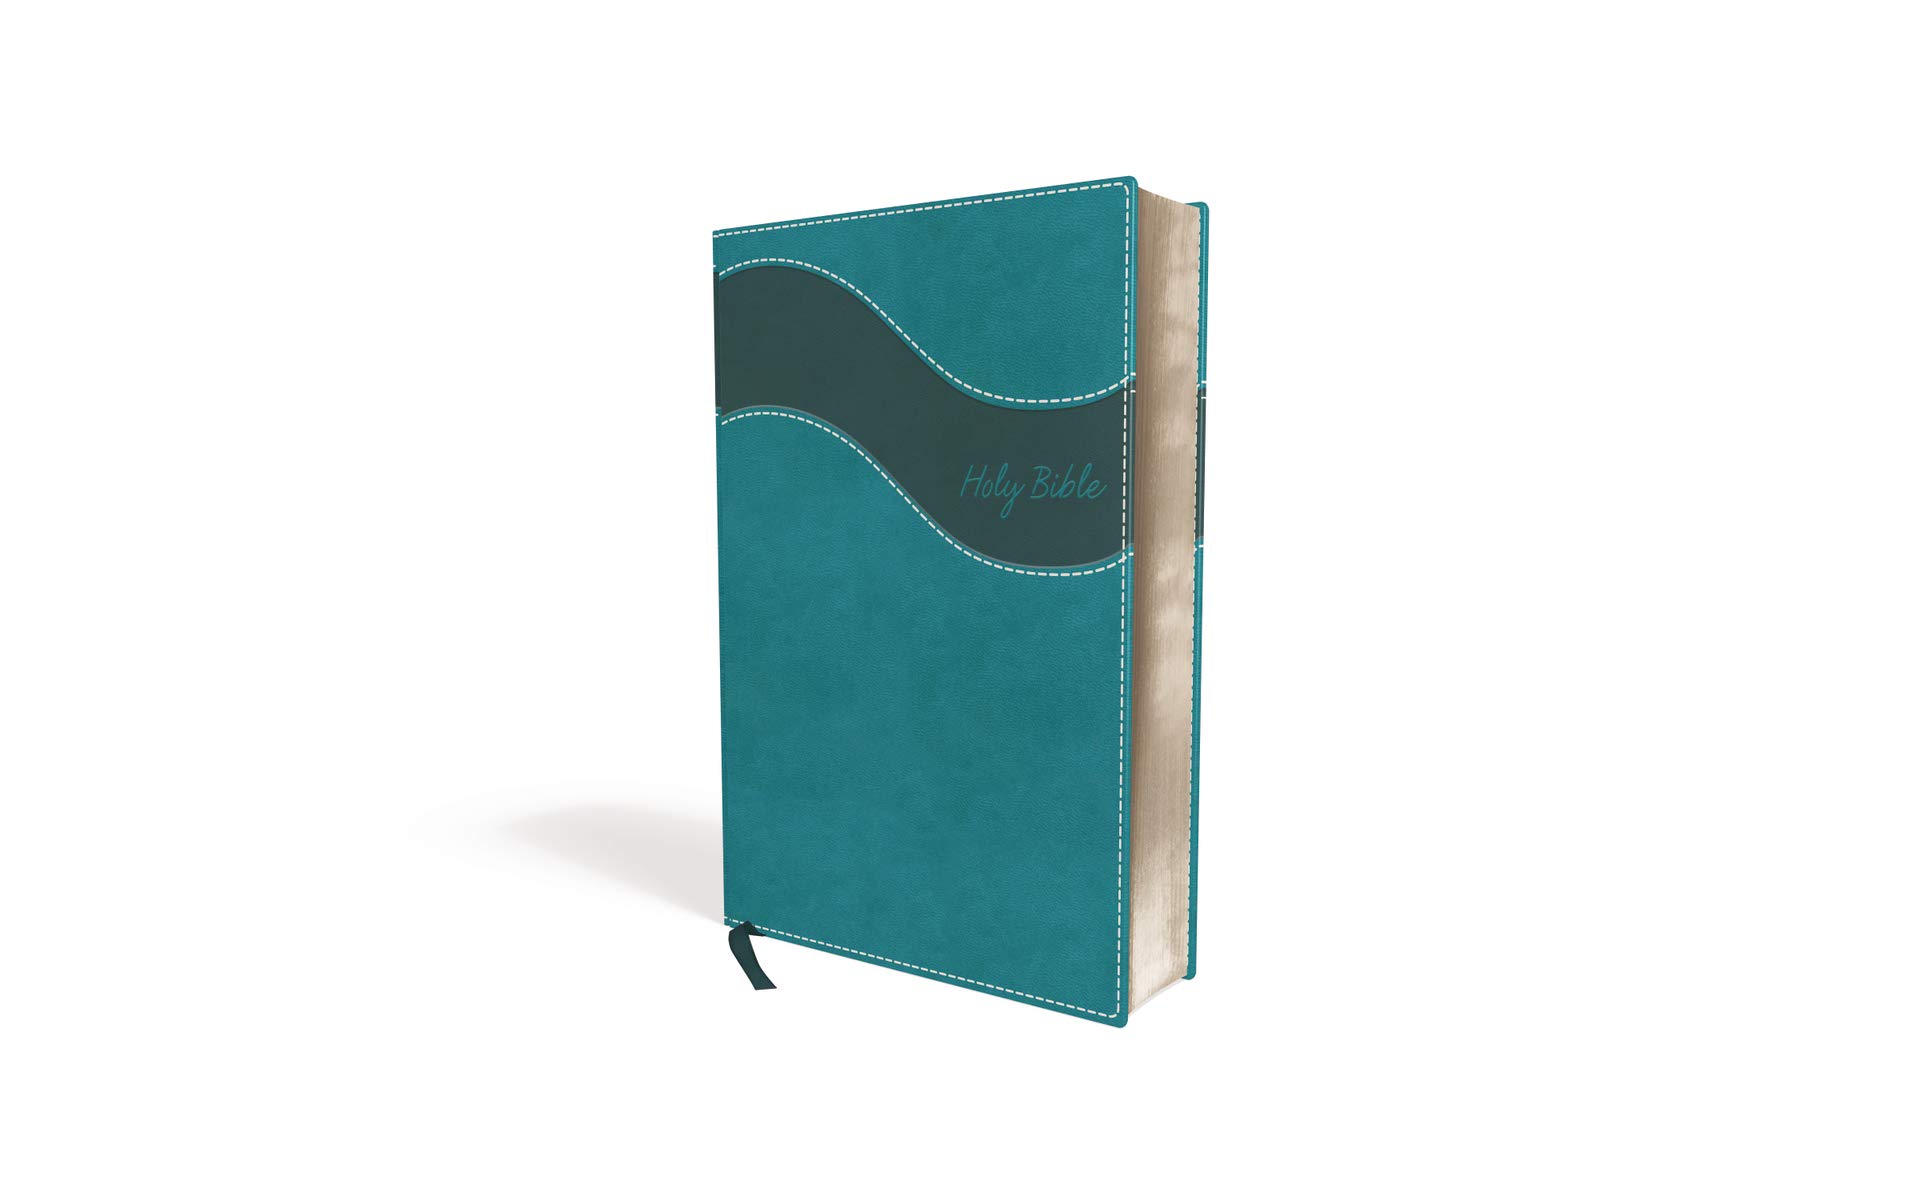 NIV, Premium Gift Bible, Leathersoft, Teal, Red Letter, Comfort Print: The Perfect Bible for Any Gift-Giving Occasion